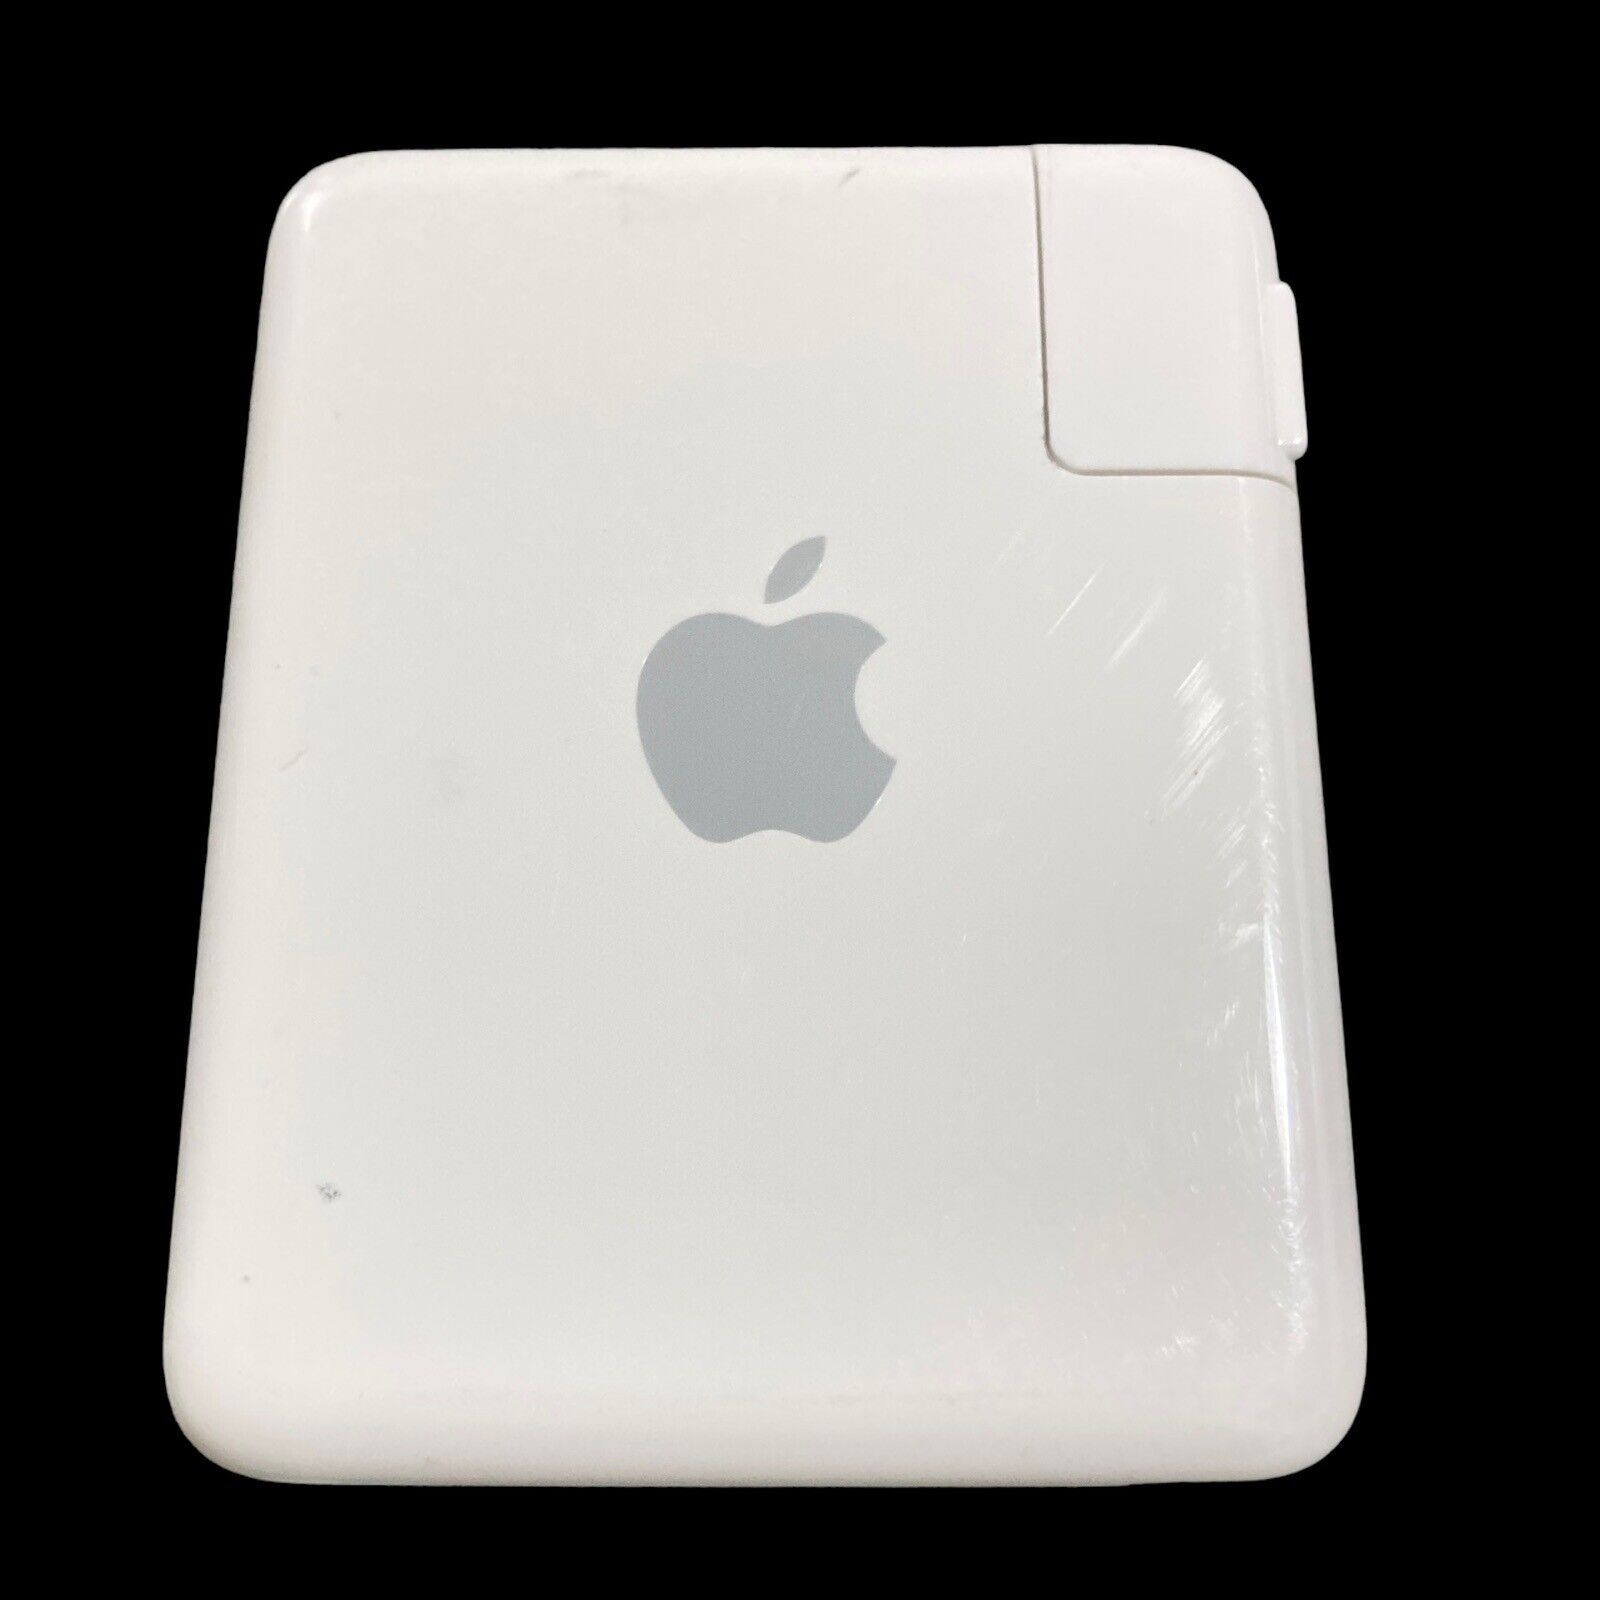 Apple AirPort Express Wi-Fi Base Station Model A1084